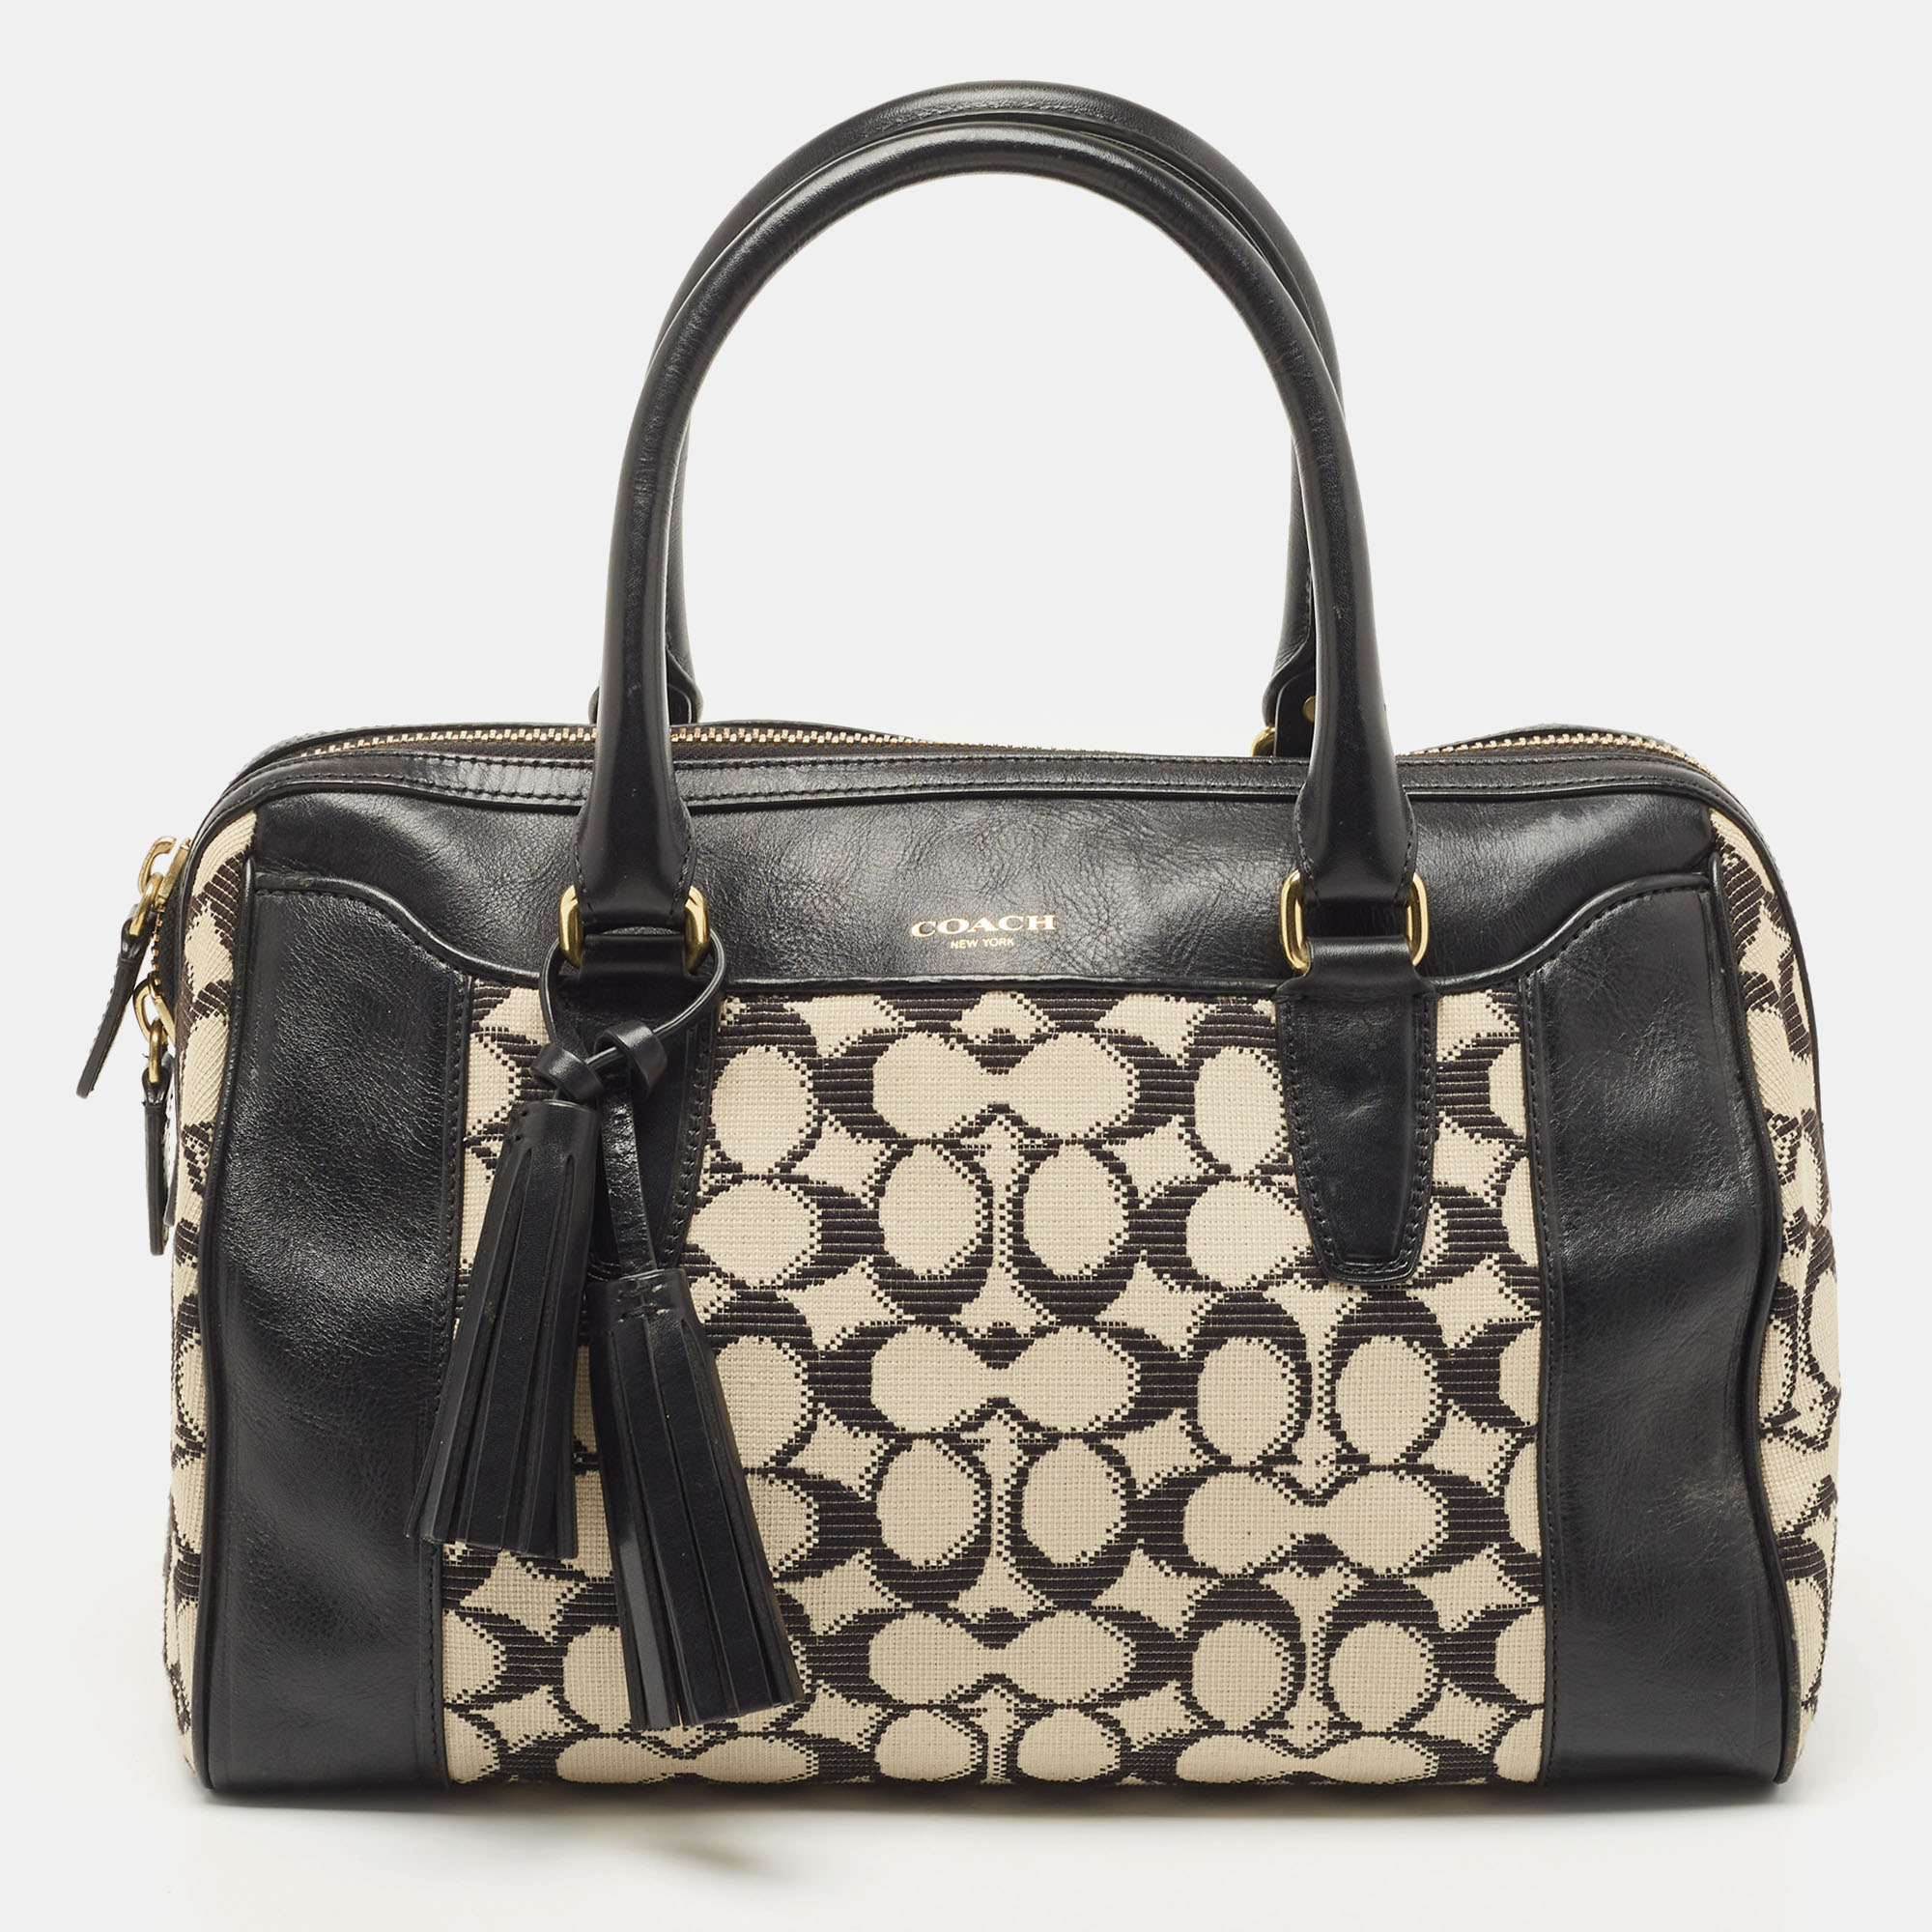 Coach Black/White Signature Canvas And Leather Legacy Haley Satchel